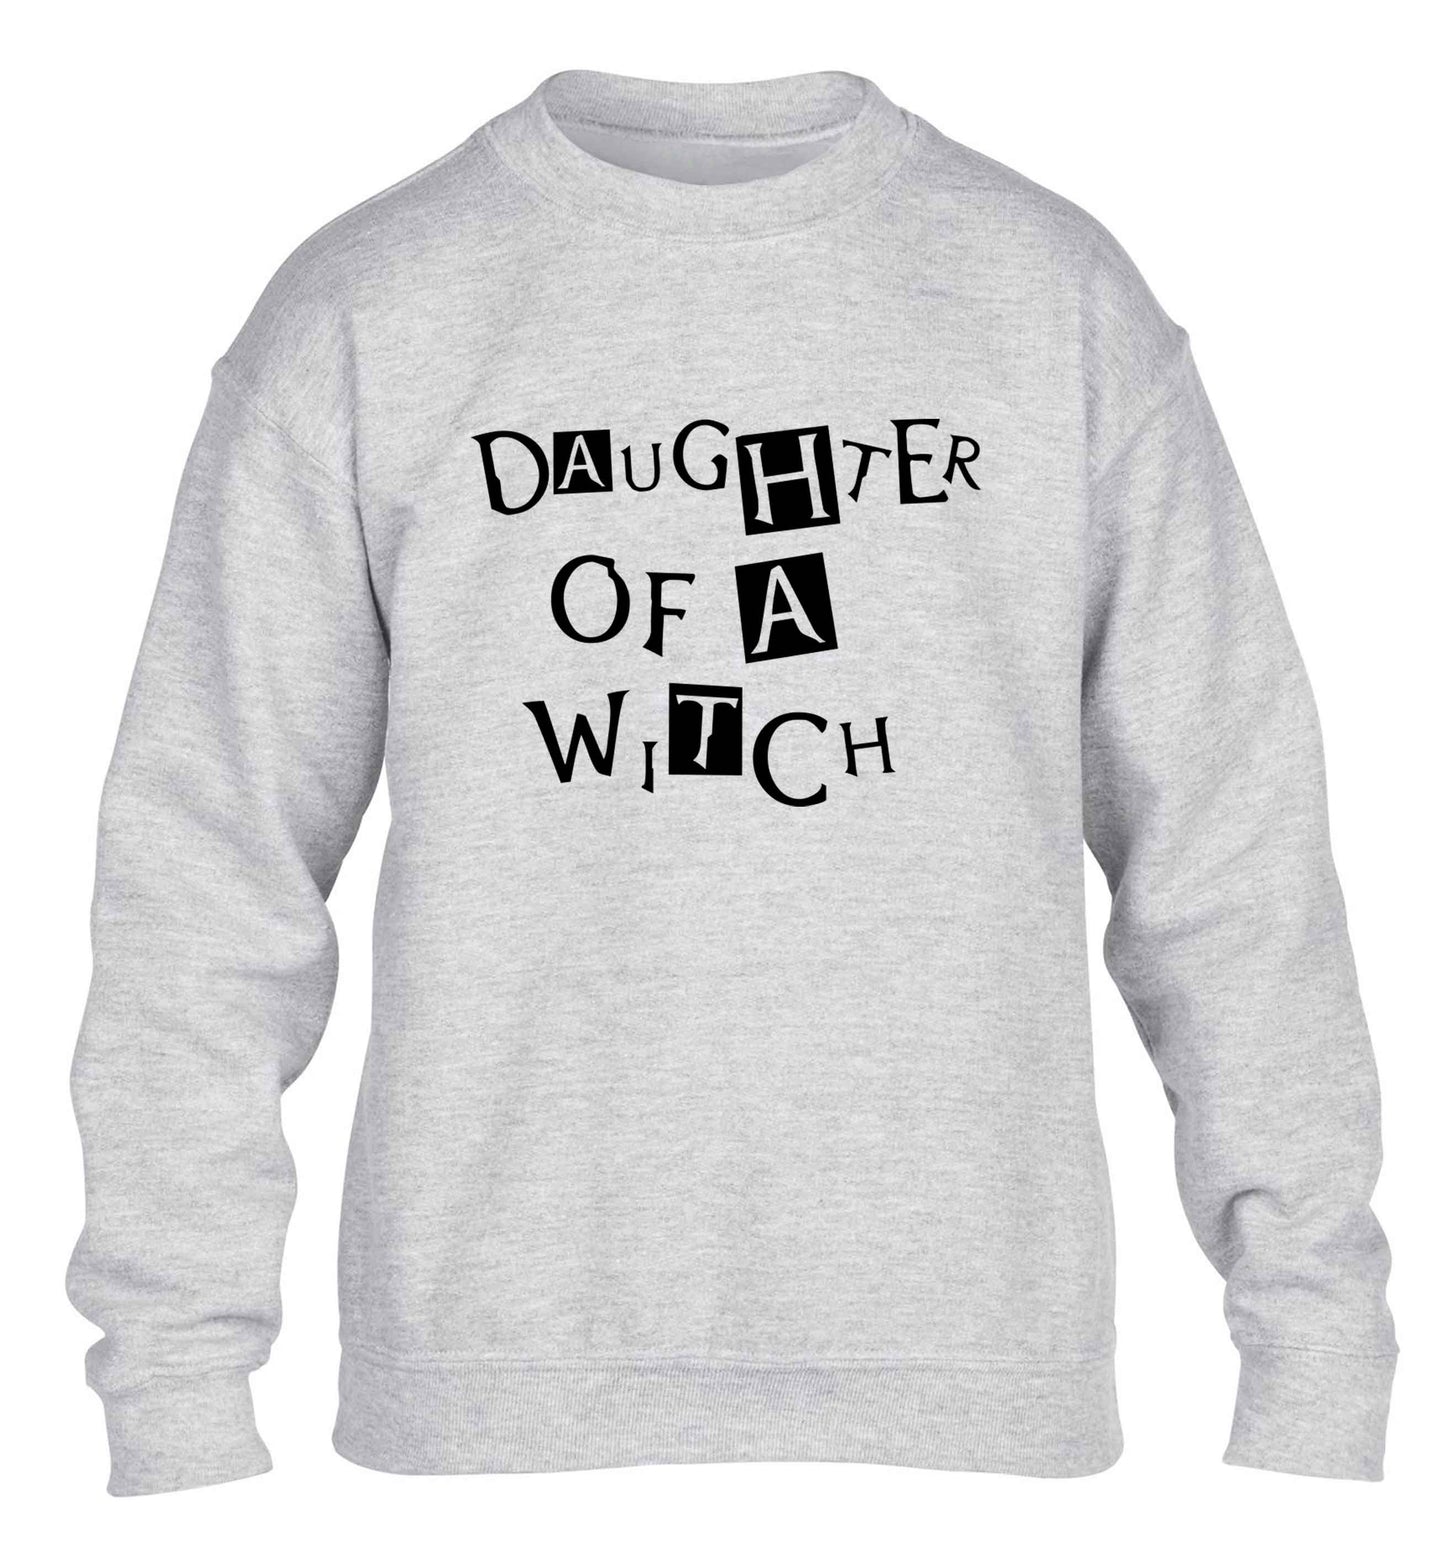 Daughter of a witch children's grey sweater 12-13 Years